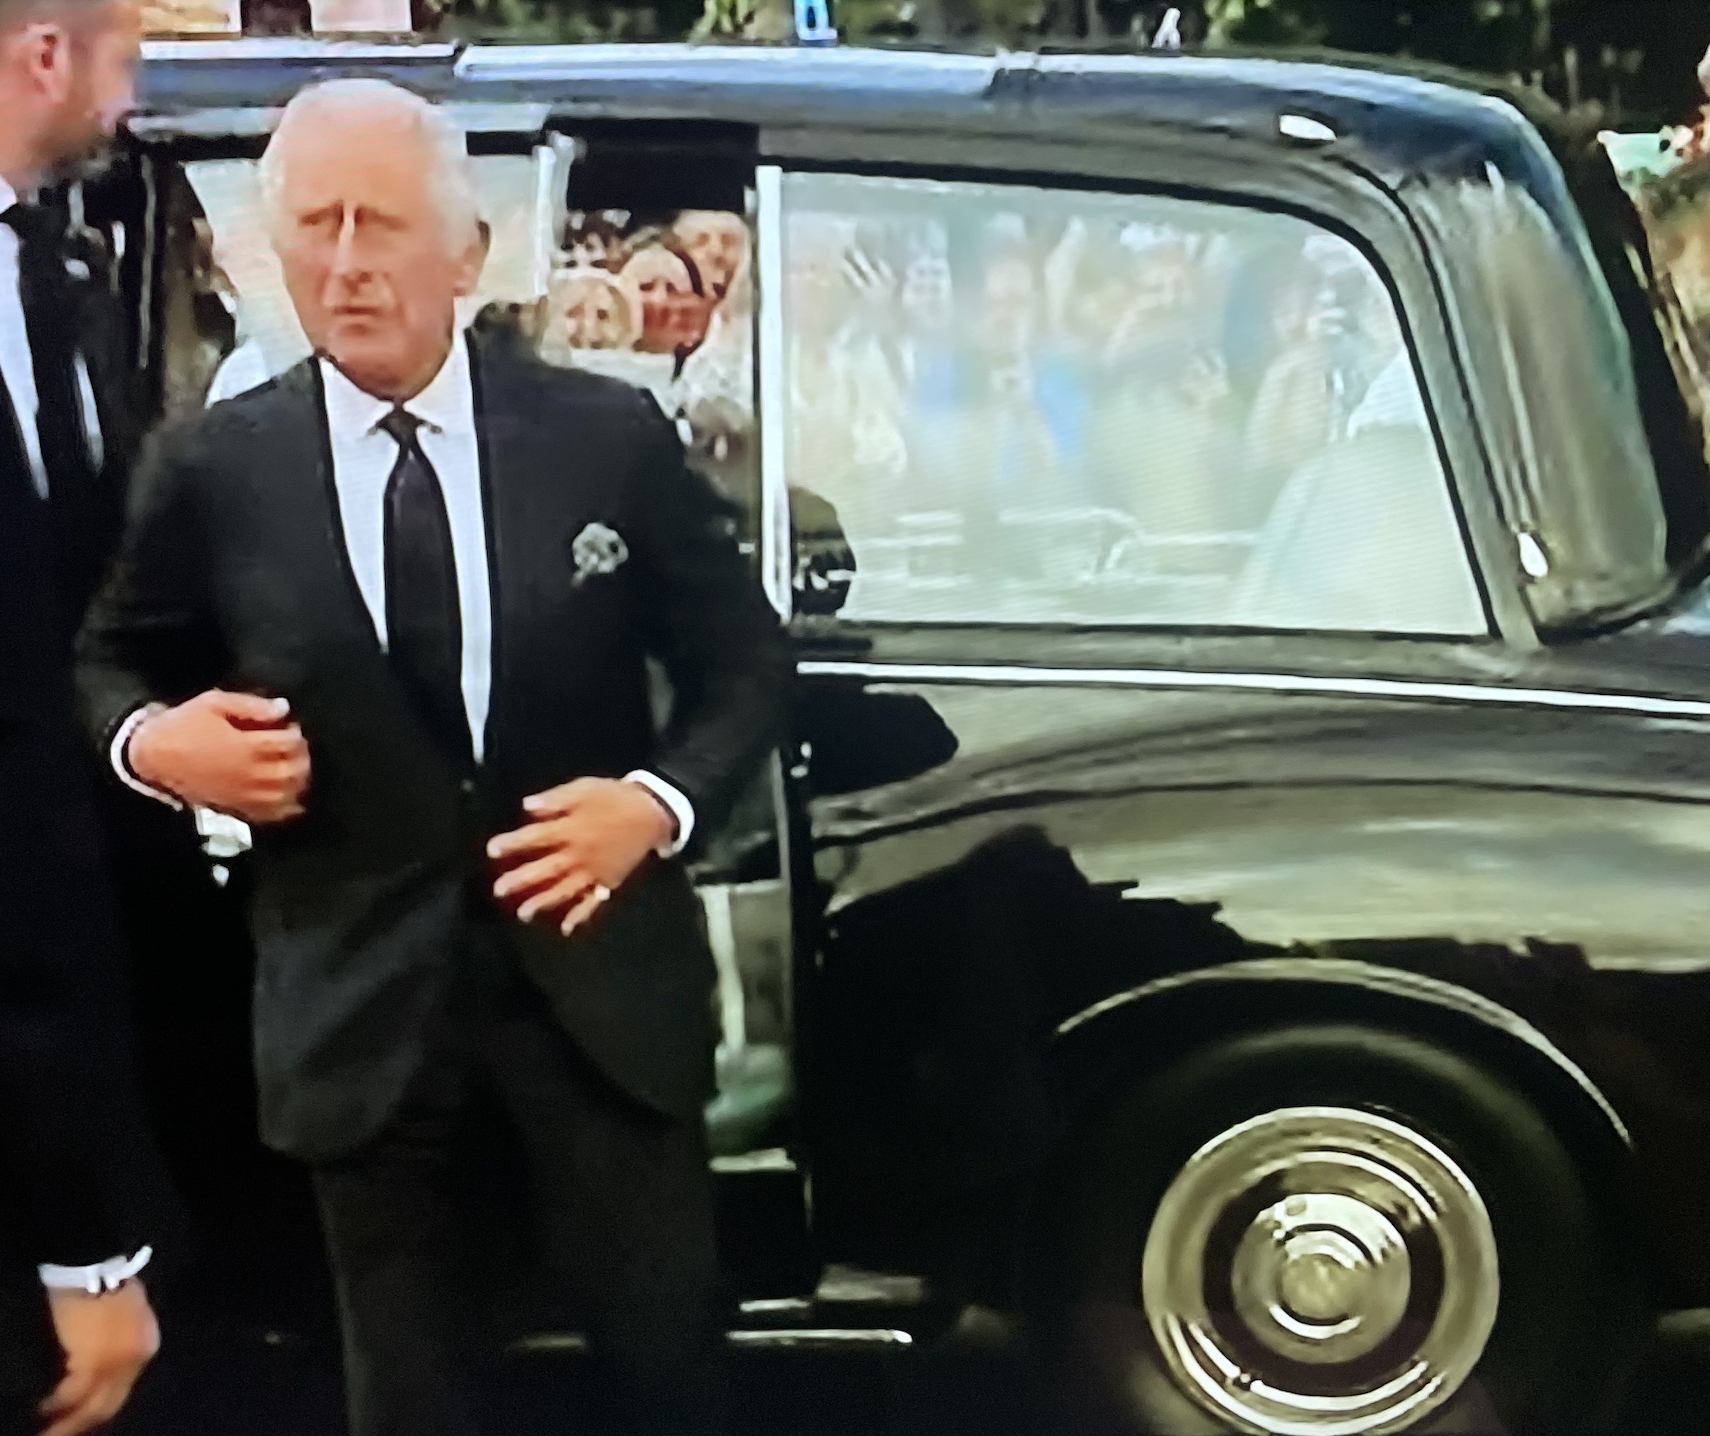 Charles arriving at Buckingham Palace.